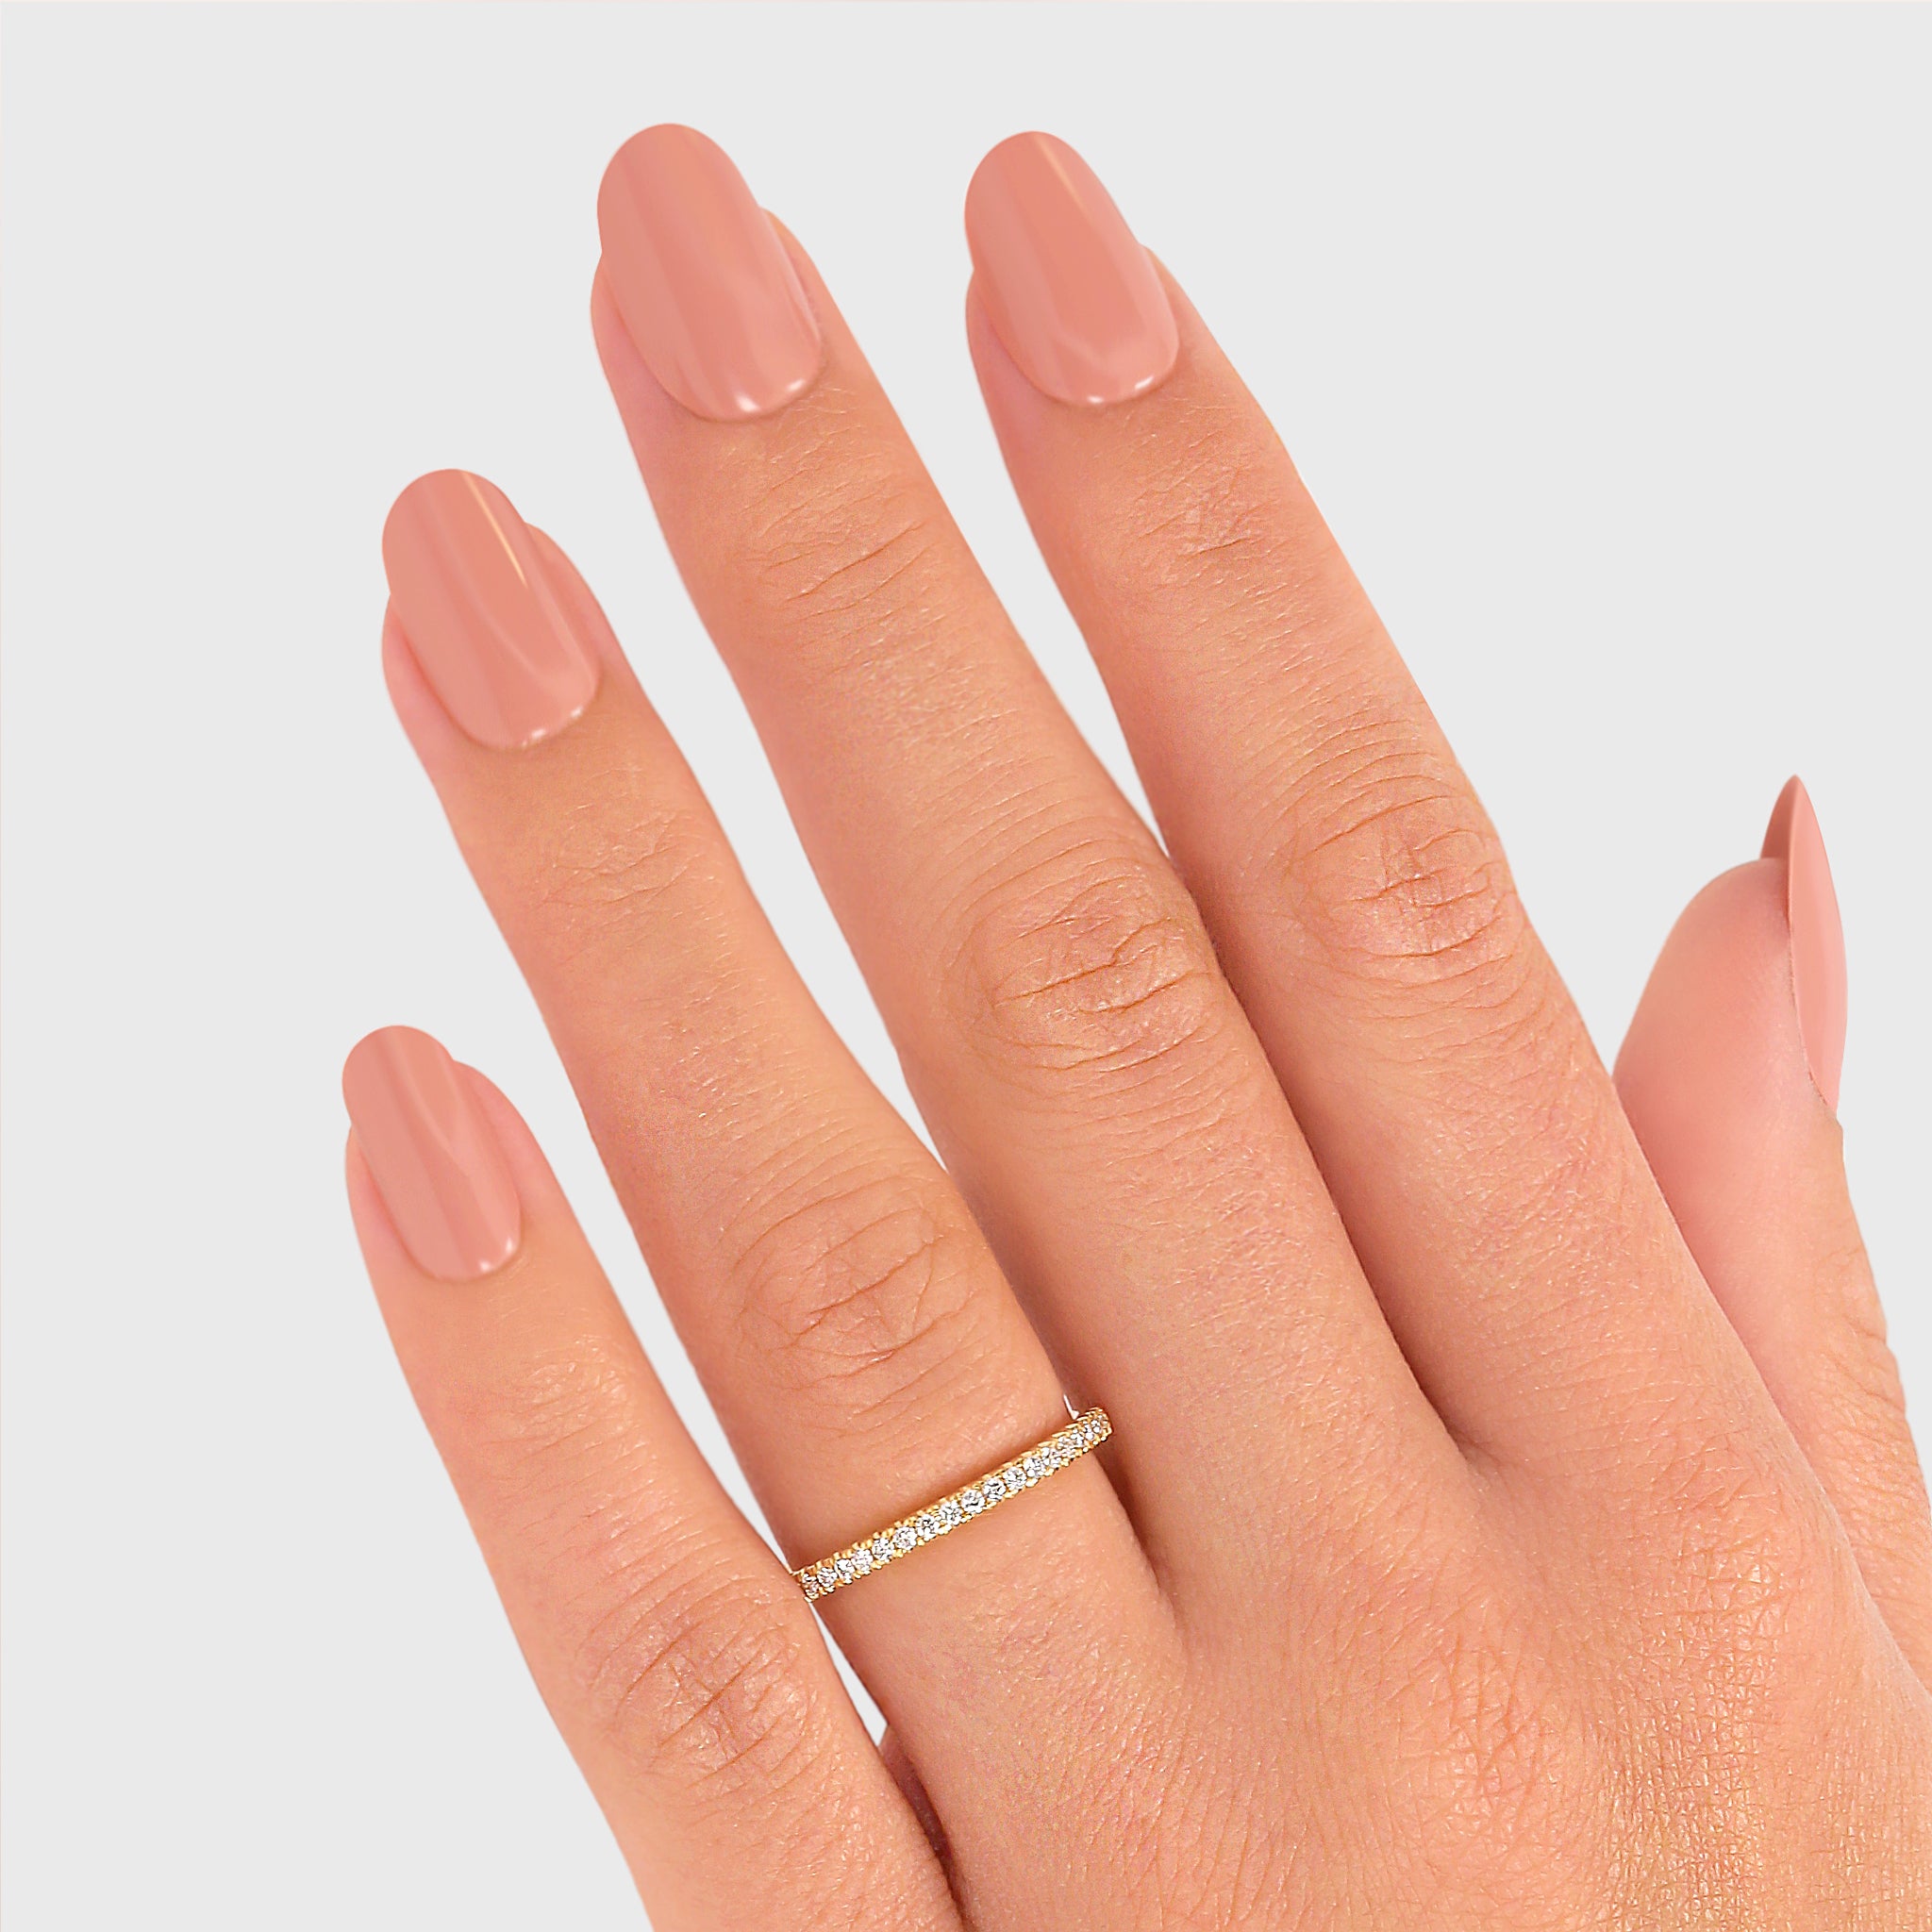 Shimansky - Women Wearing the Ladies Diamond Wedding Band Crafted in 18K Yellow Gold